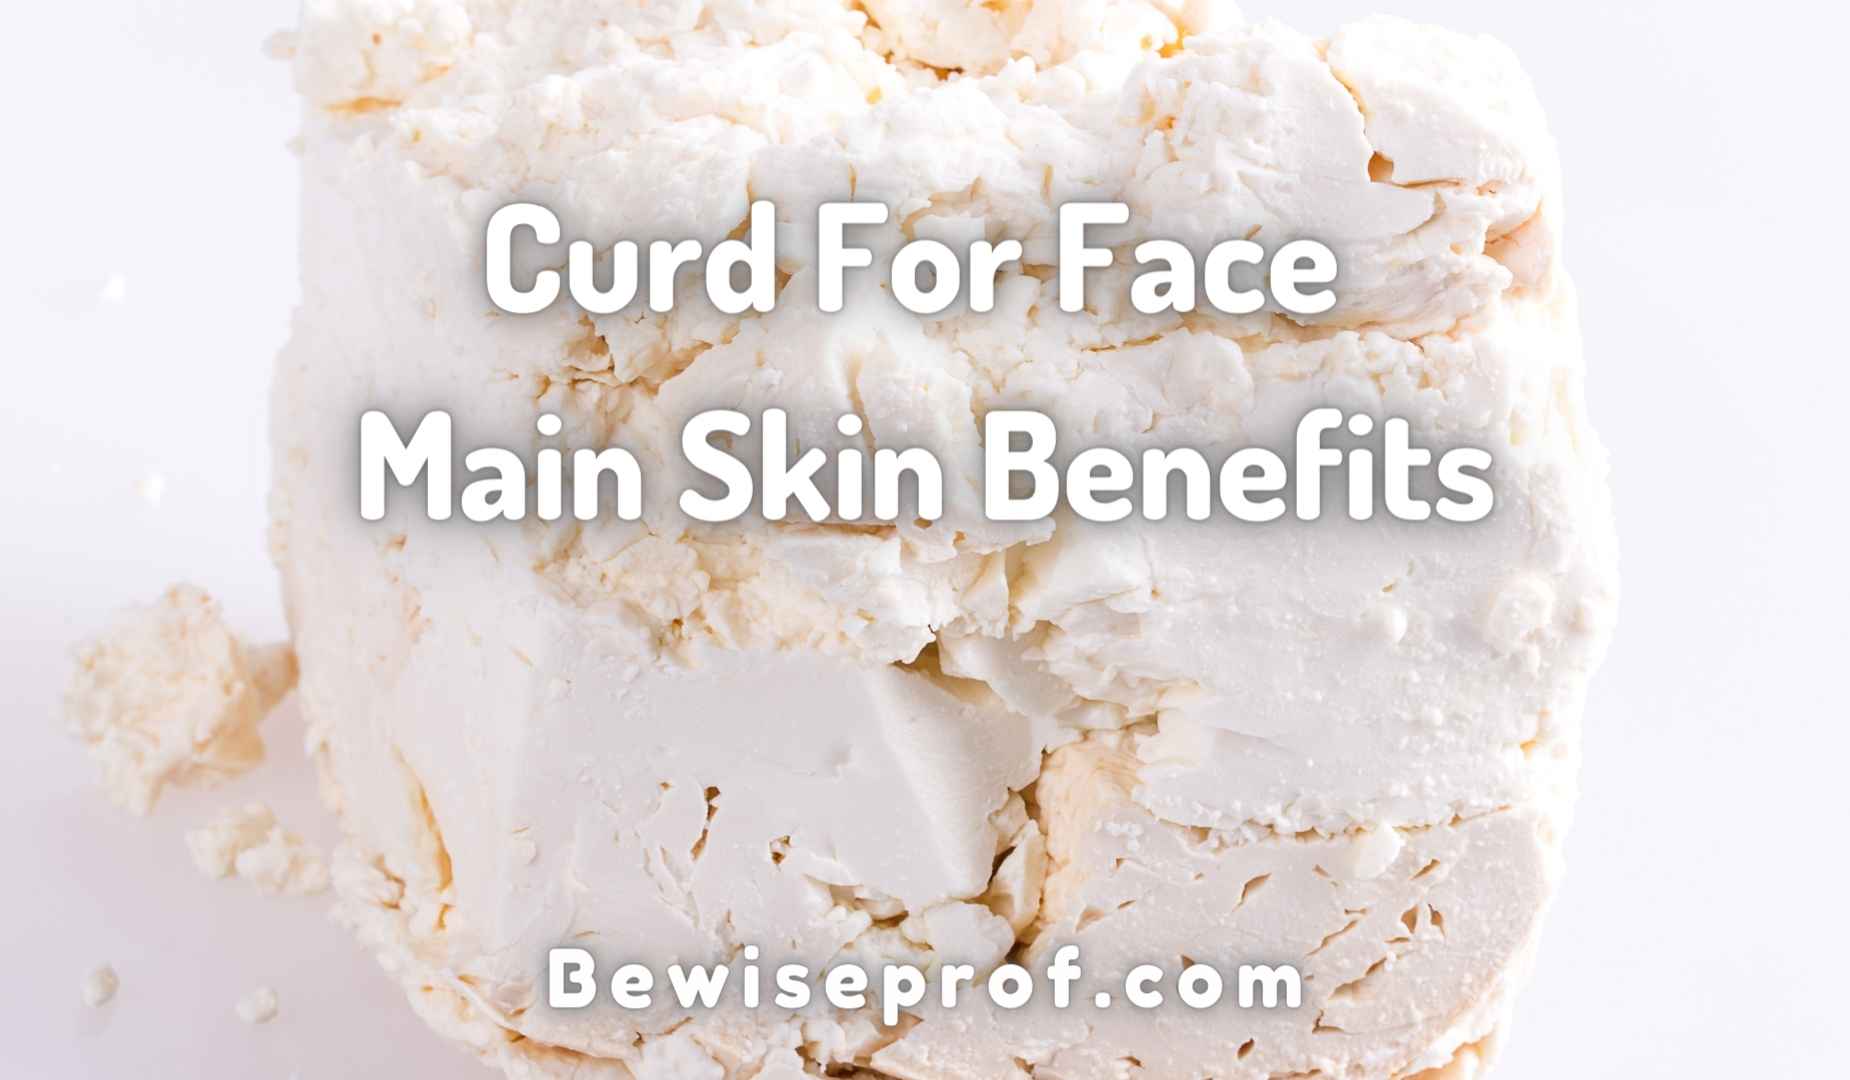 Curd For Face Main Skin Benefits